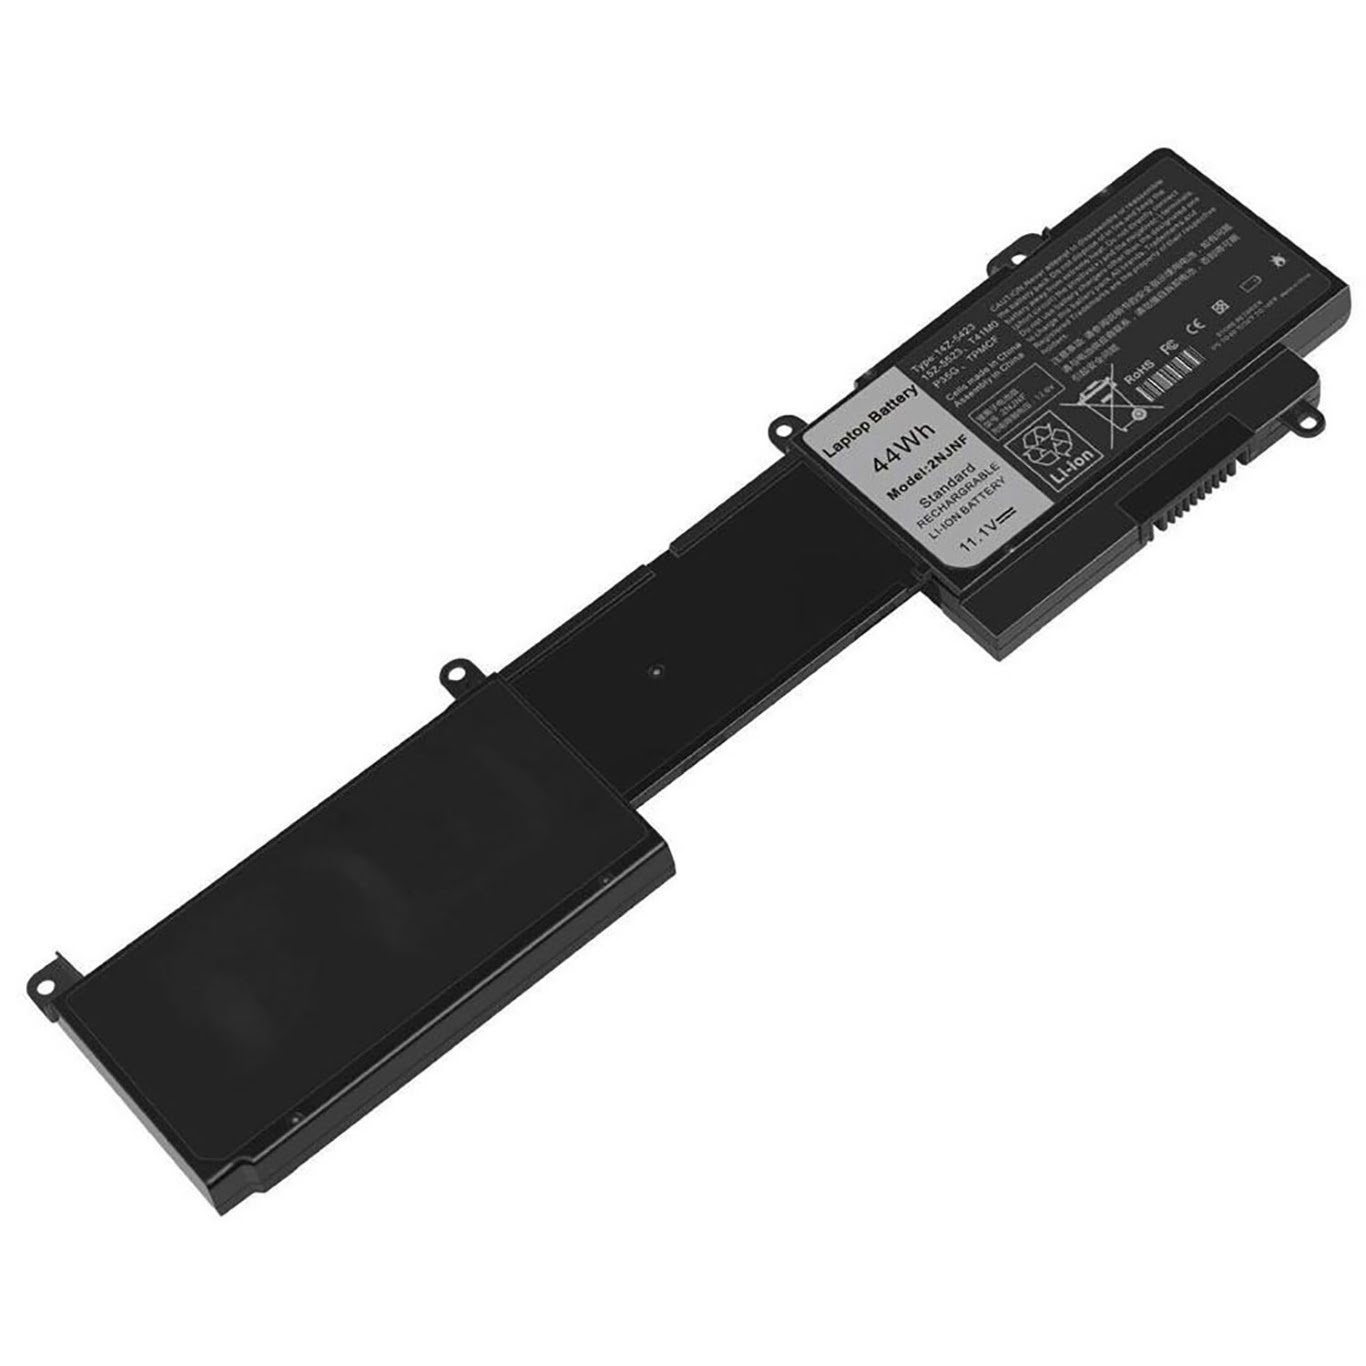 Dell 2njnf, Tpmcf Laptop Battery For Inspiron 14z (5423), Inspiron 5423 replacement